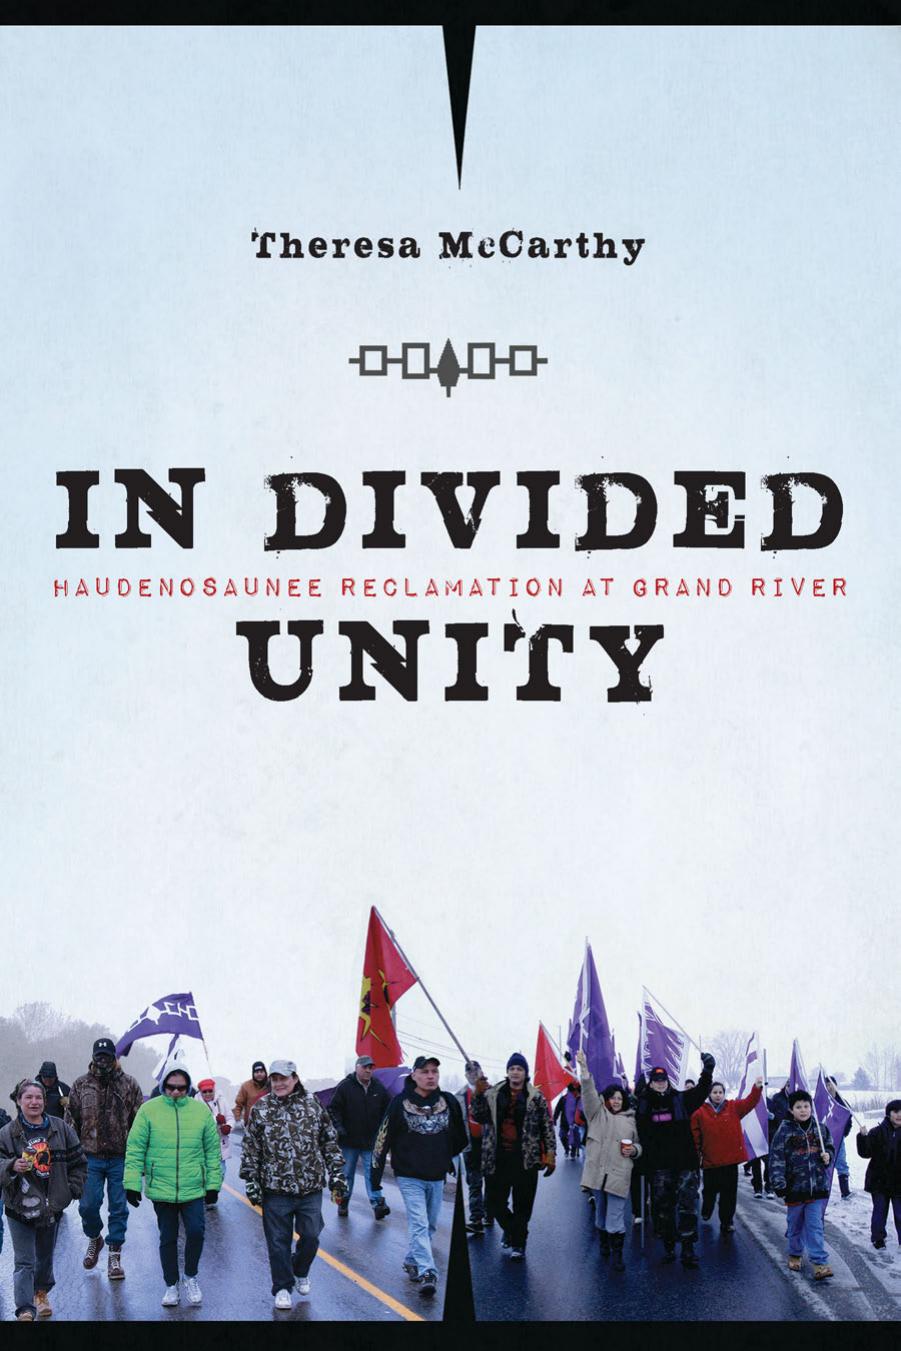 In Divided Unity: Haudenosaunee Reclamation at Grand River by Theresa McCarthy